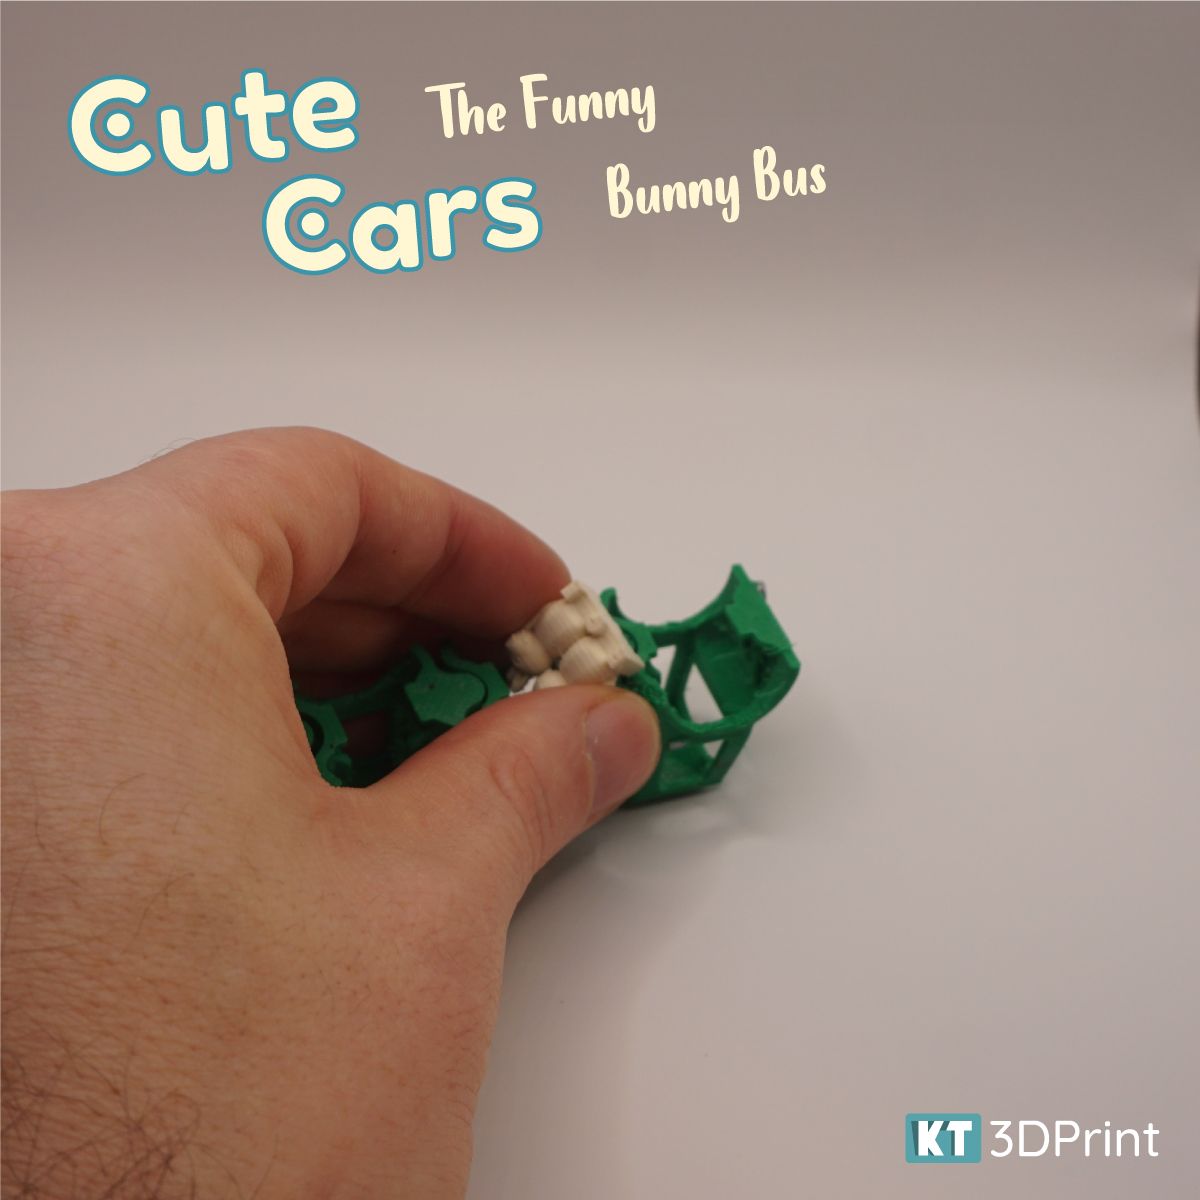 CuteCarsBunny_7.jpg Download STL file Cute Cars - Funny Bunny Bus • 3D printing object, KT3Dprint